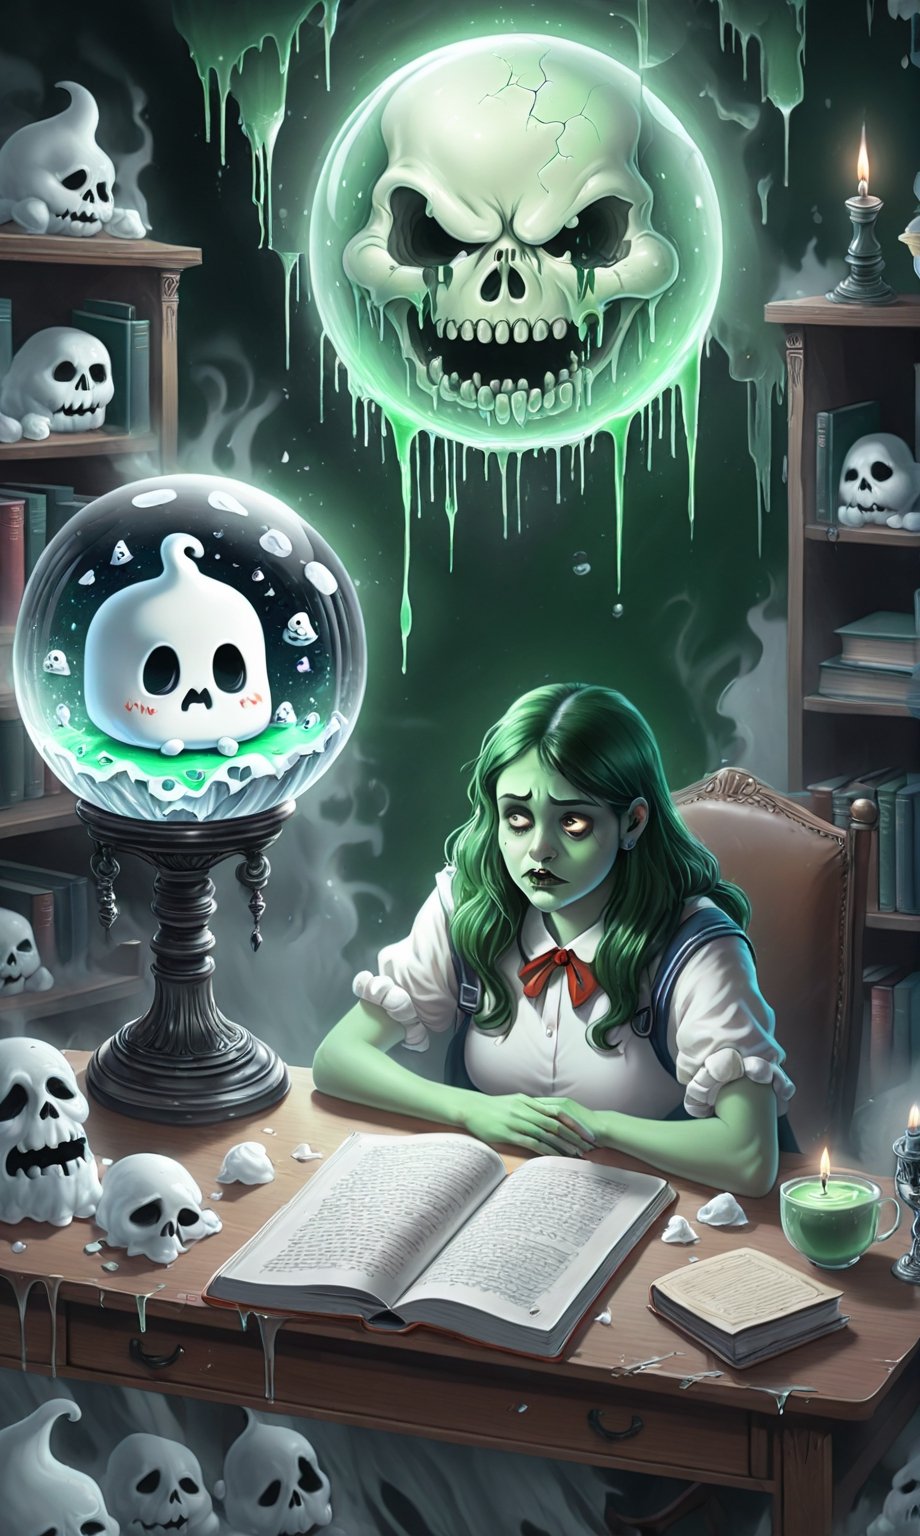 ((A wispy sad ghoul girl sitting at a desk)), she is studying book, ((an image of Stay Puft Marshmallow Man appears in the crystal ball on the desk)),drippy candle on the table, (donuts on the table),(green ghosts with skull faces float in the background),donmcr33pyn1ghtm4r3xl  